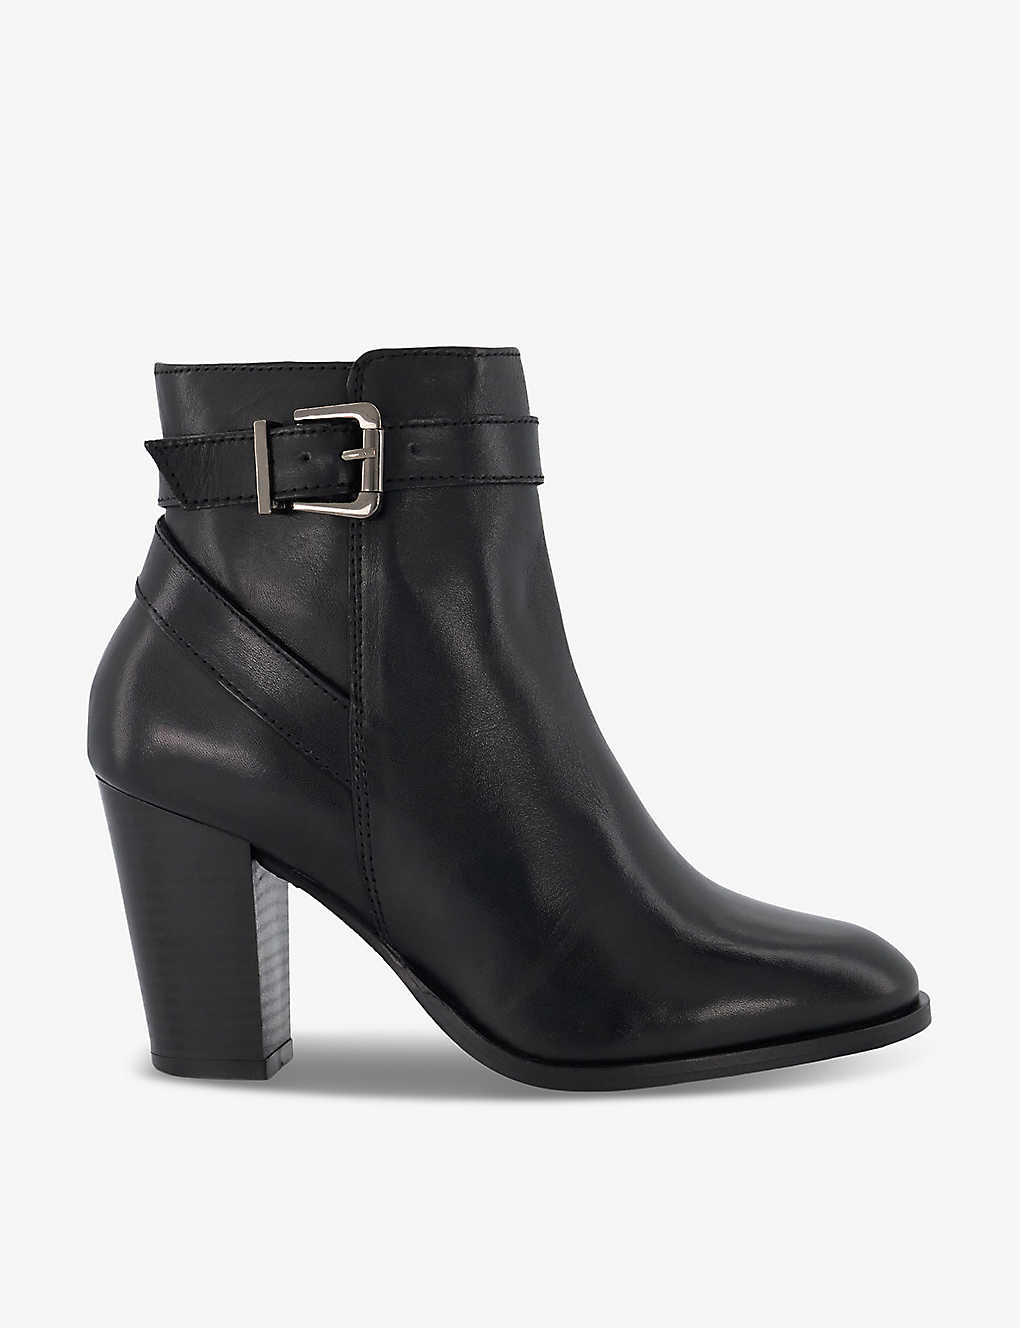 Dune Womens Black-leather Philippa Buckle-embellished Block-heel Leather Ankle Boots